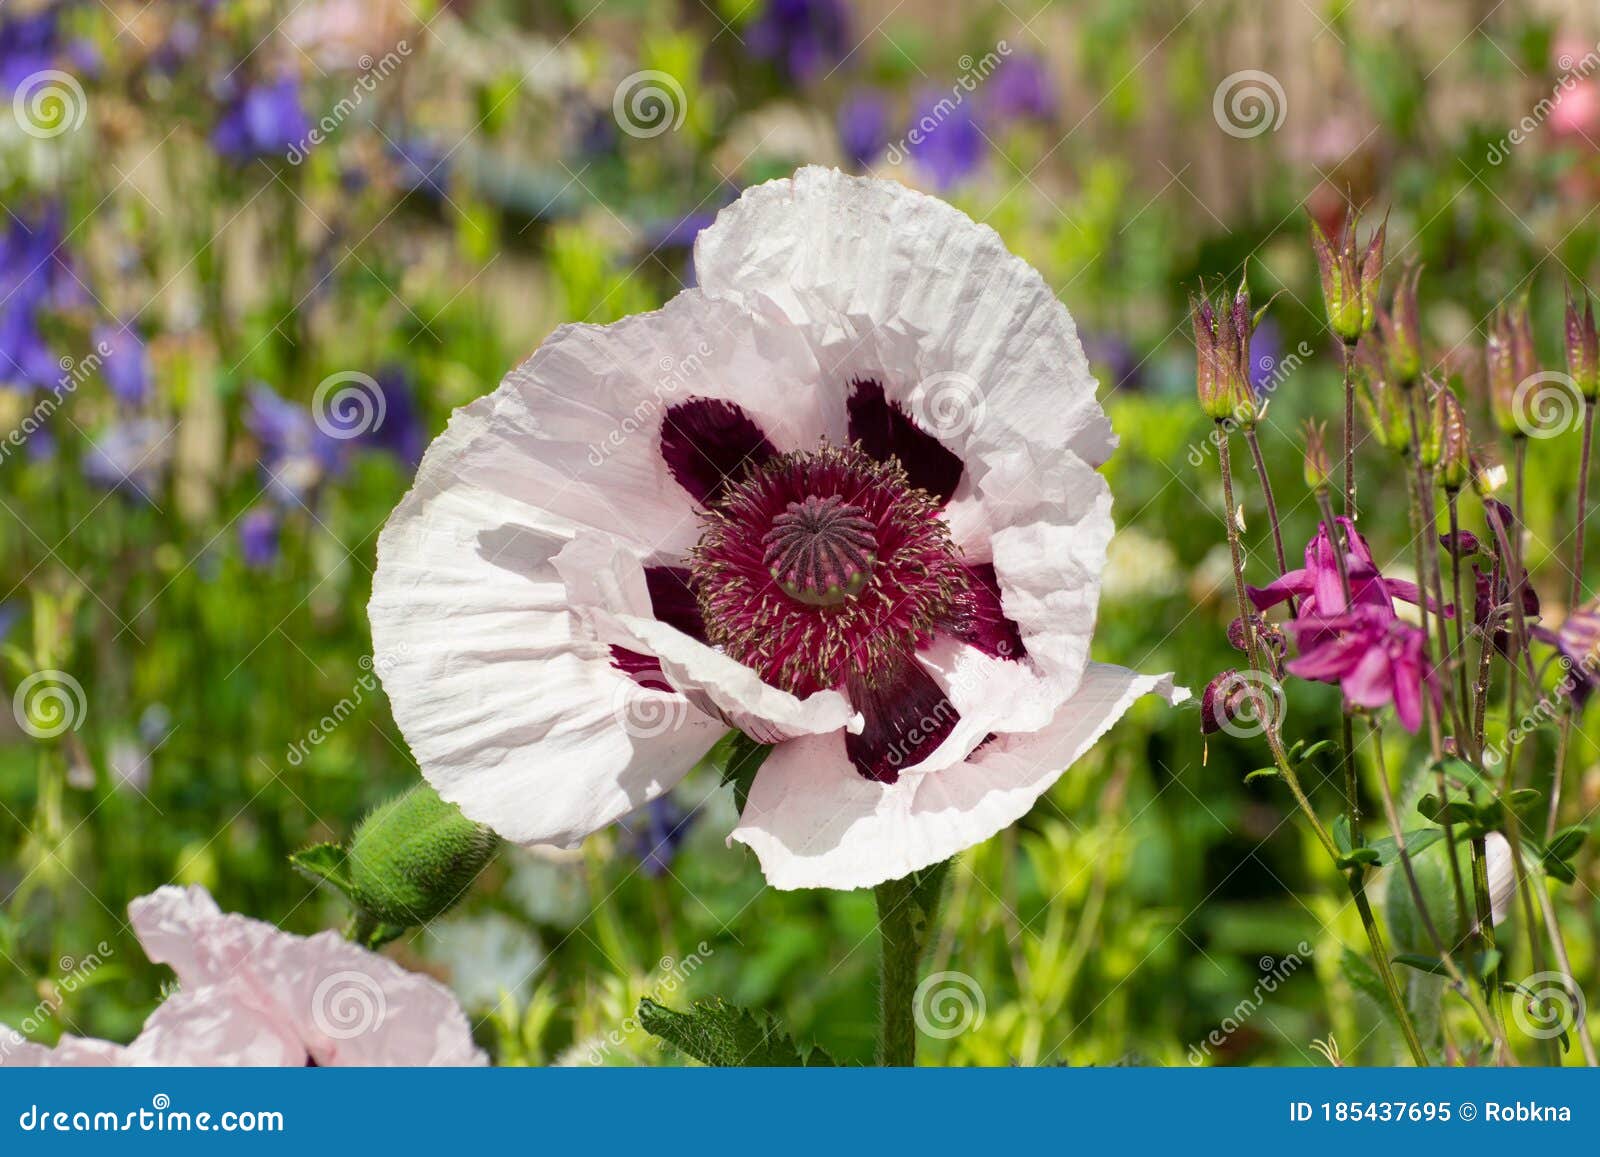 close up of a white and purple oriental poppy, papaver orientale or royal wedding